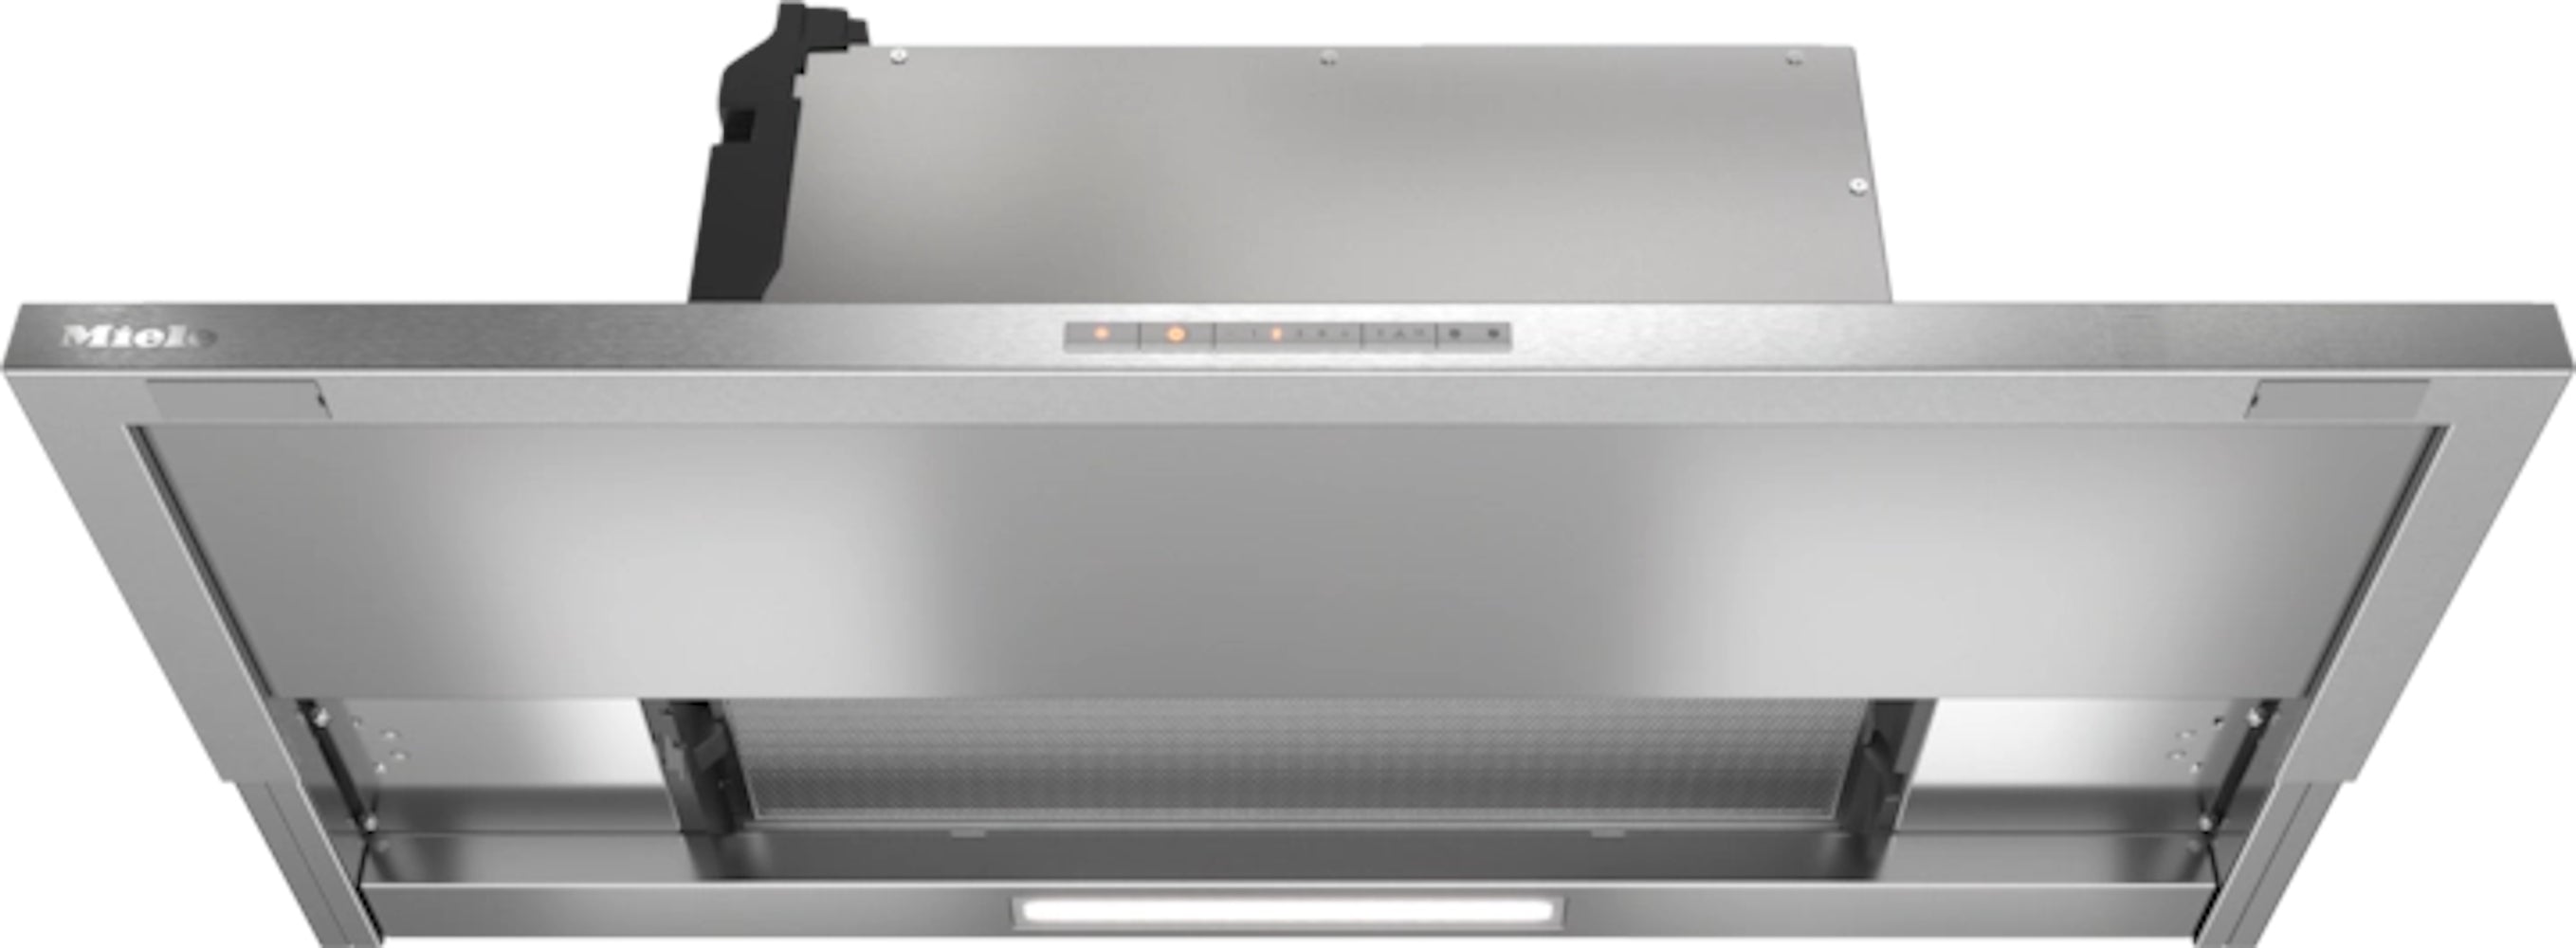 Miele - 35.4 Inch  CFM Island Range Vent in Stainless - DAS 4920